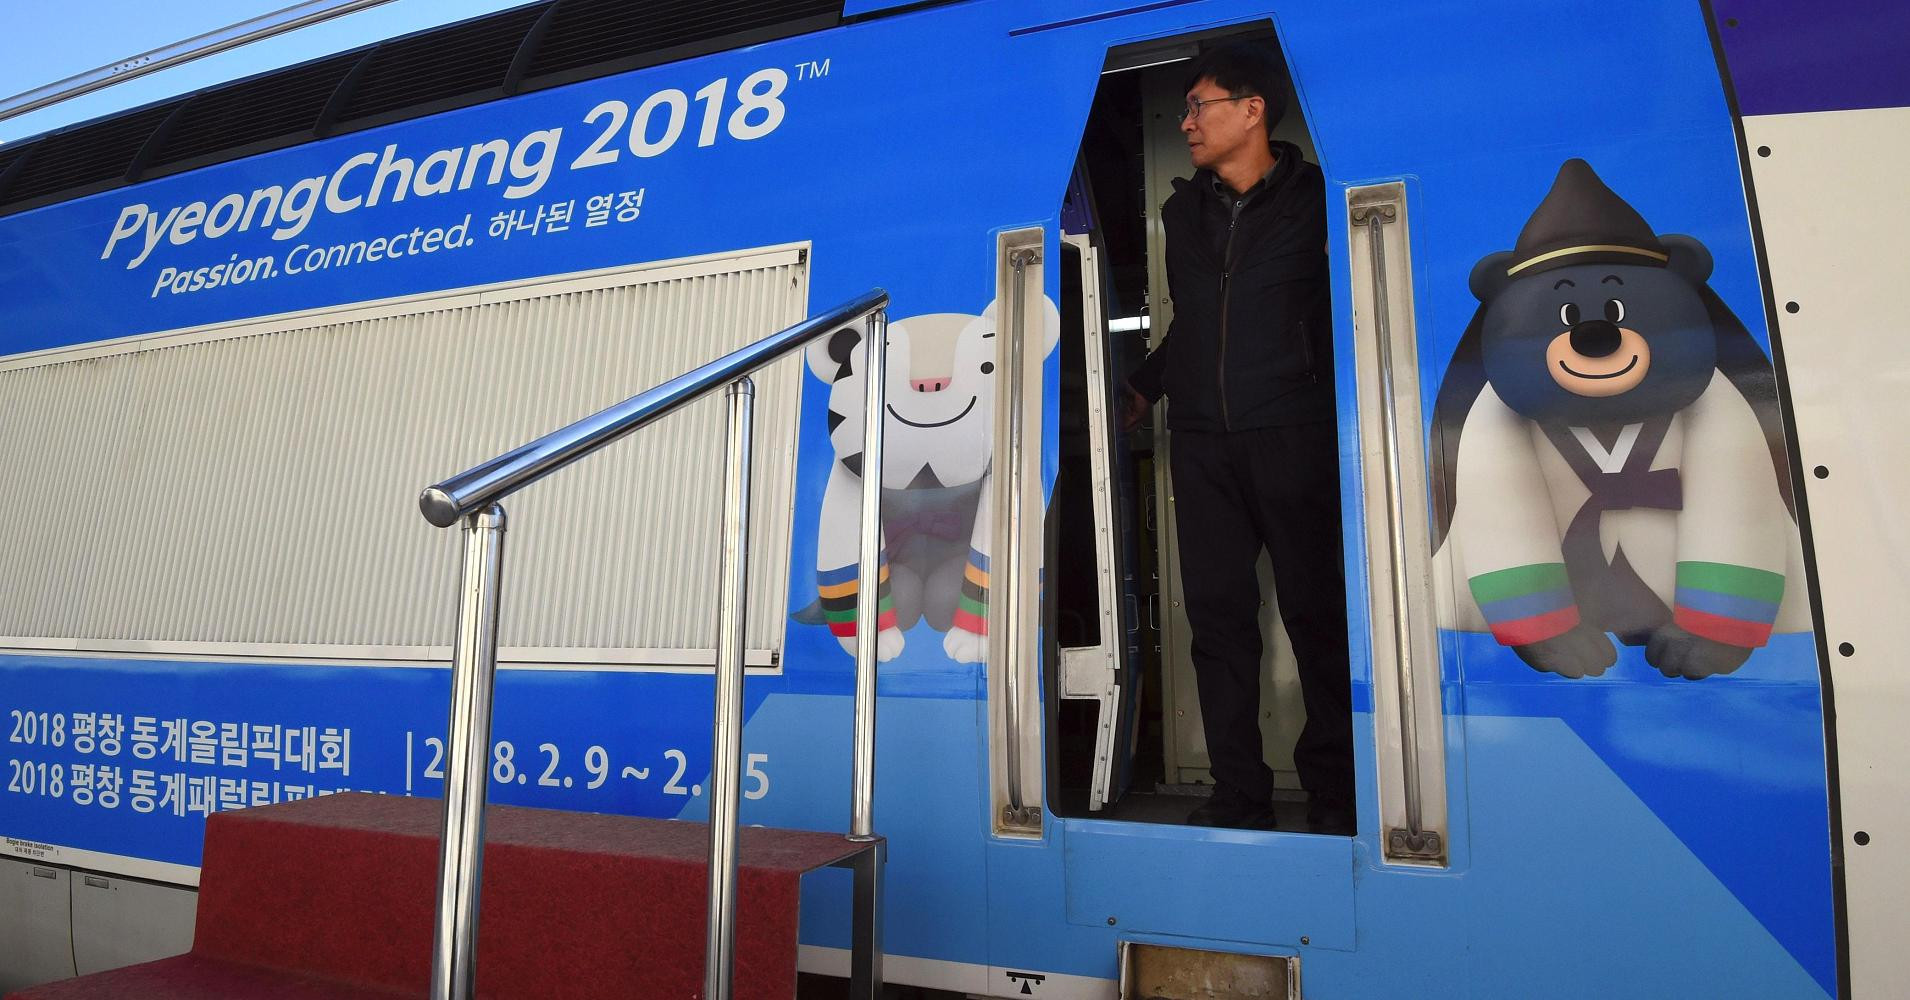 The Korea Train eXpress is due to make its first public journey on December 22 ©Getty Images